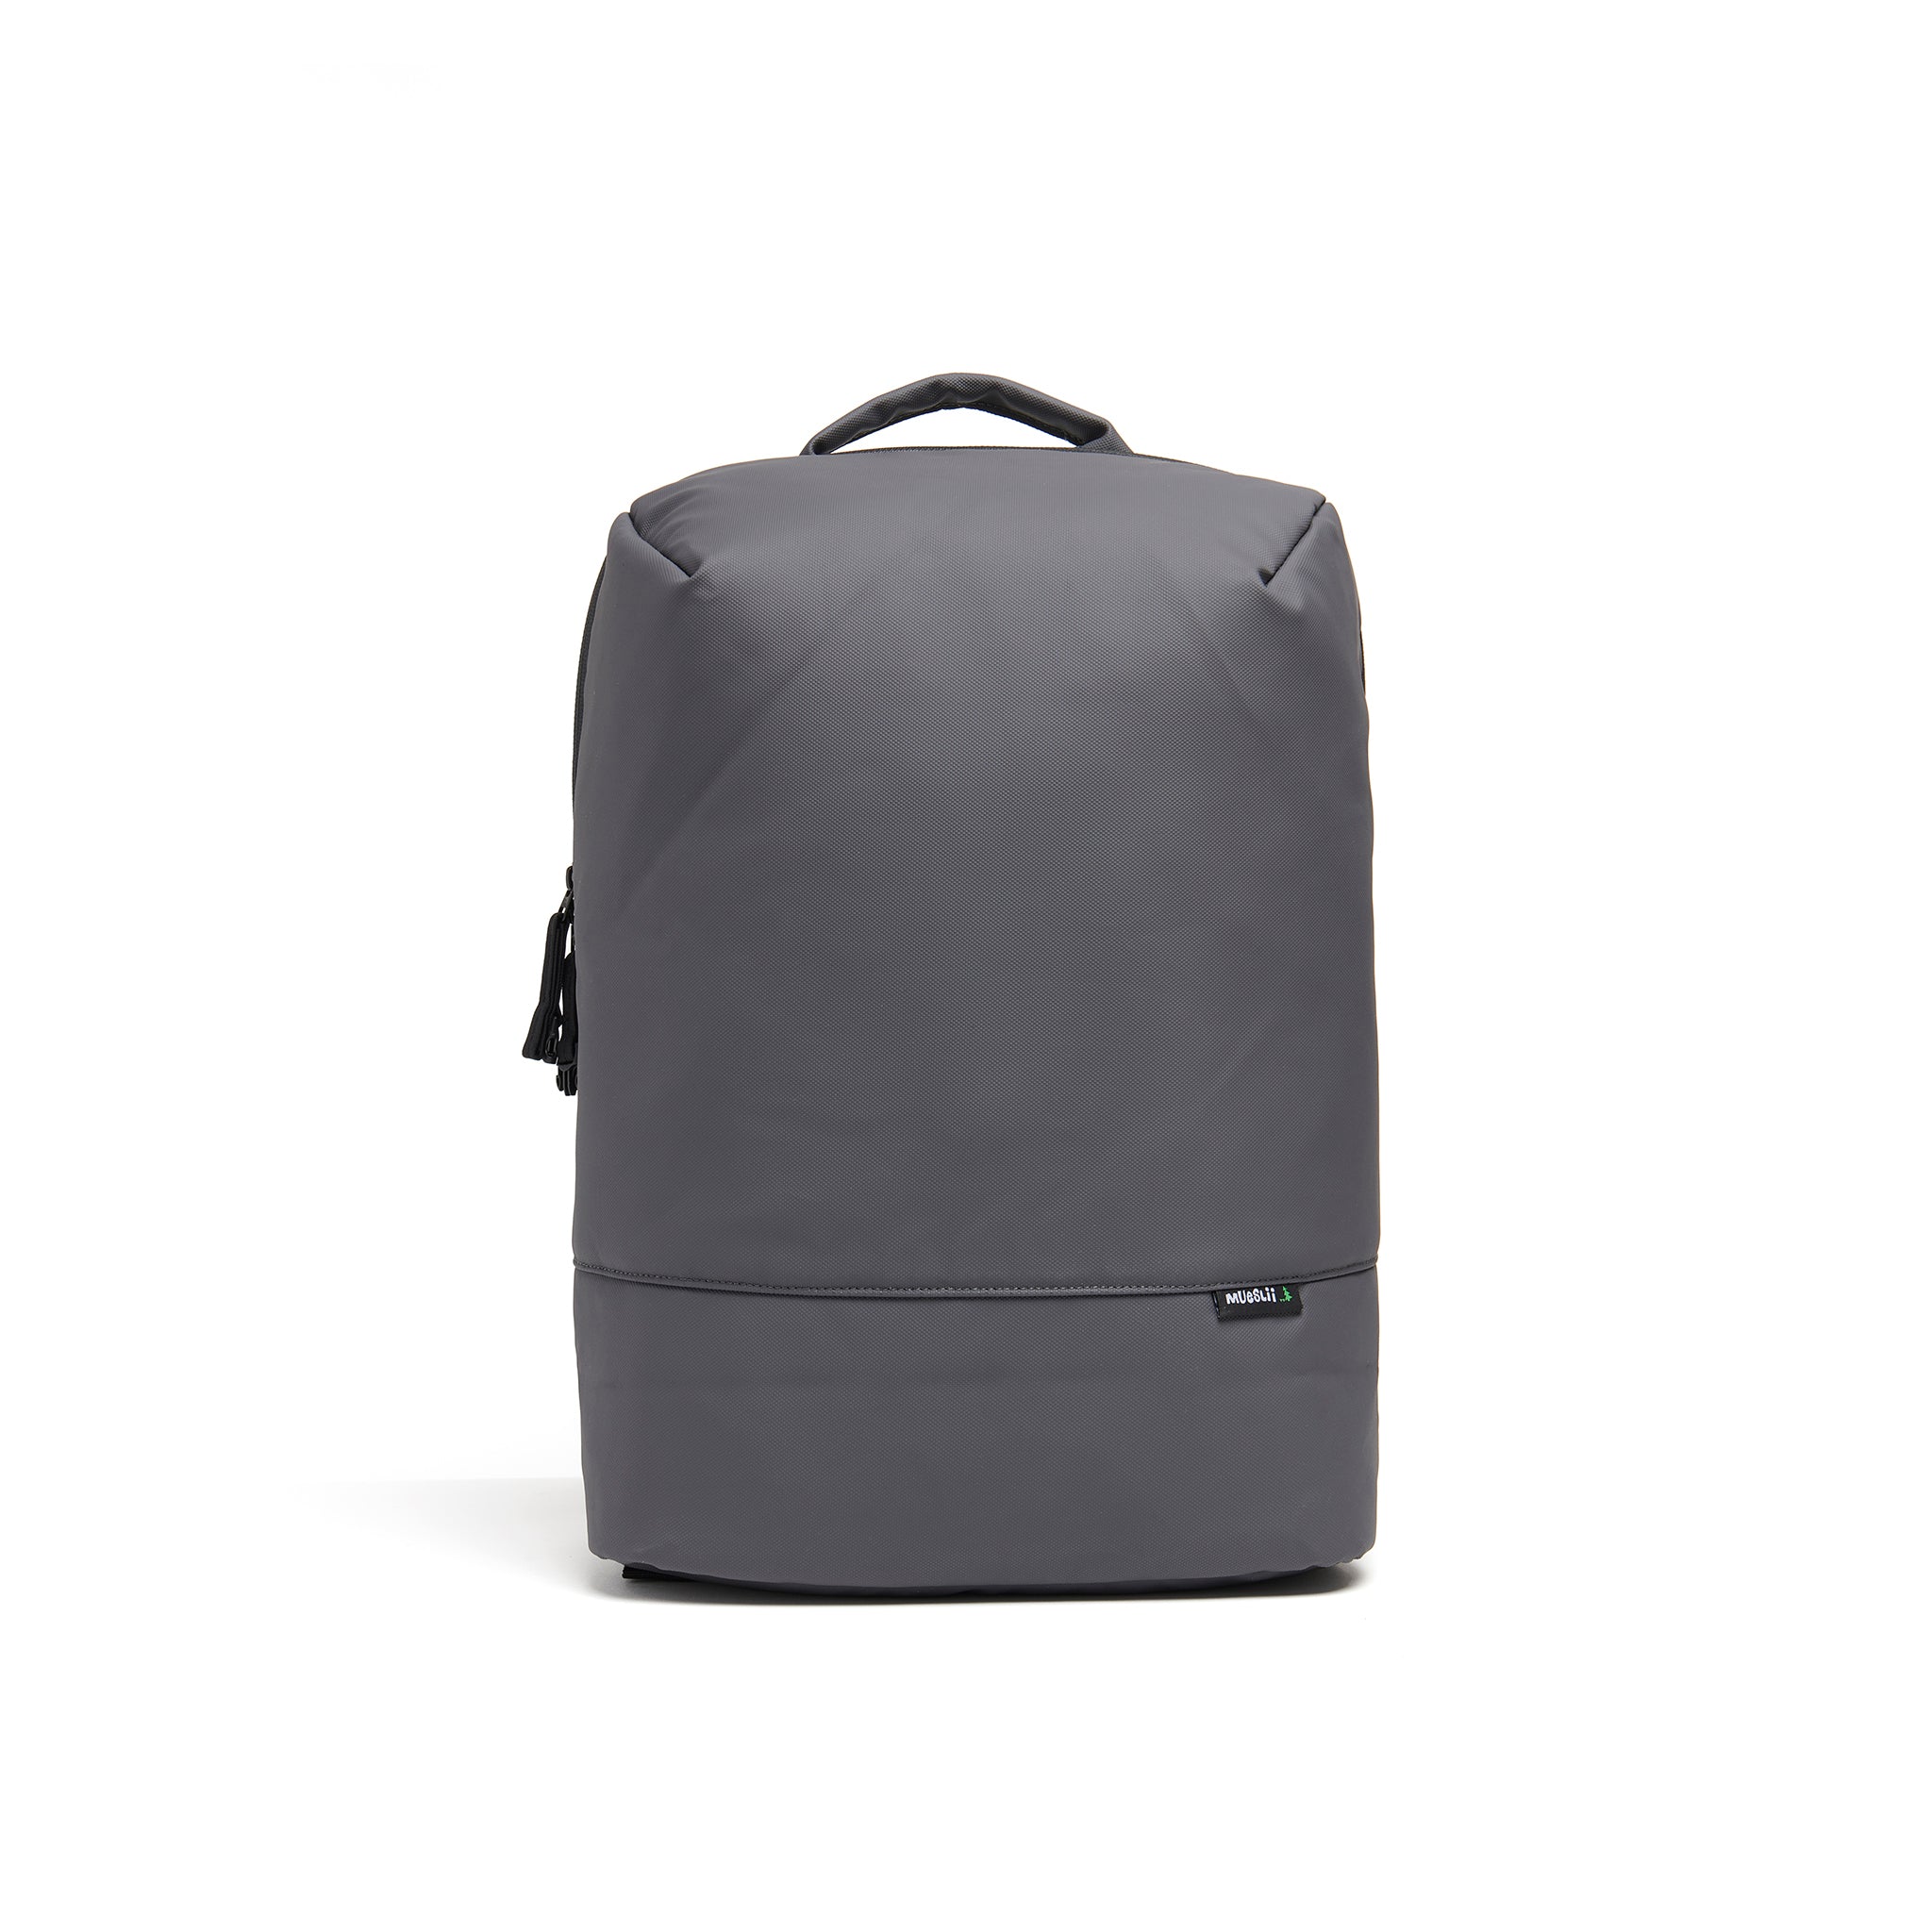  Mueslii travel backpack, made of PU coated waterproof nylon, with a laptop compartment, color slate grey, front view.